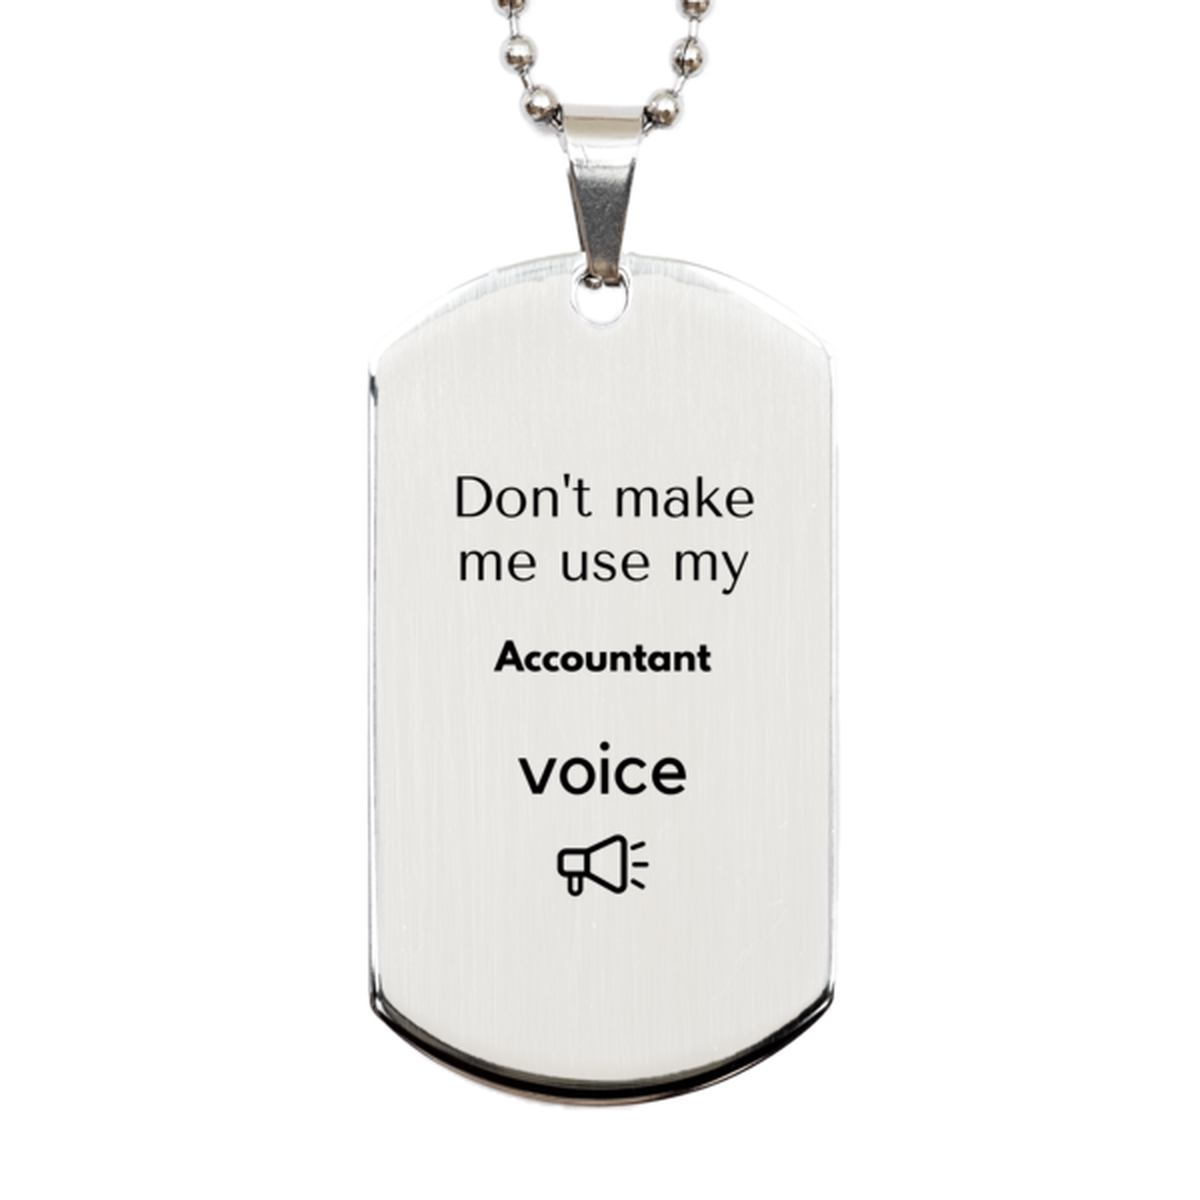 Don't make me use my Accountant voice, Sarcasm Accountant Gifts, Christmas Accountant Silver Dog Tag Birthday Unique Gifts For Accountant Coworkers, Men, Women, Colleague, Friends